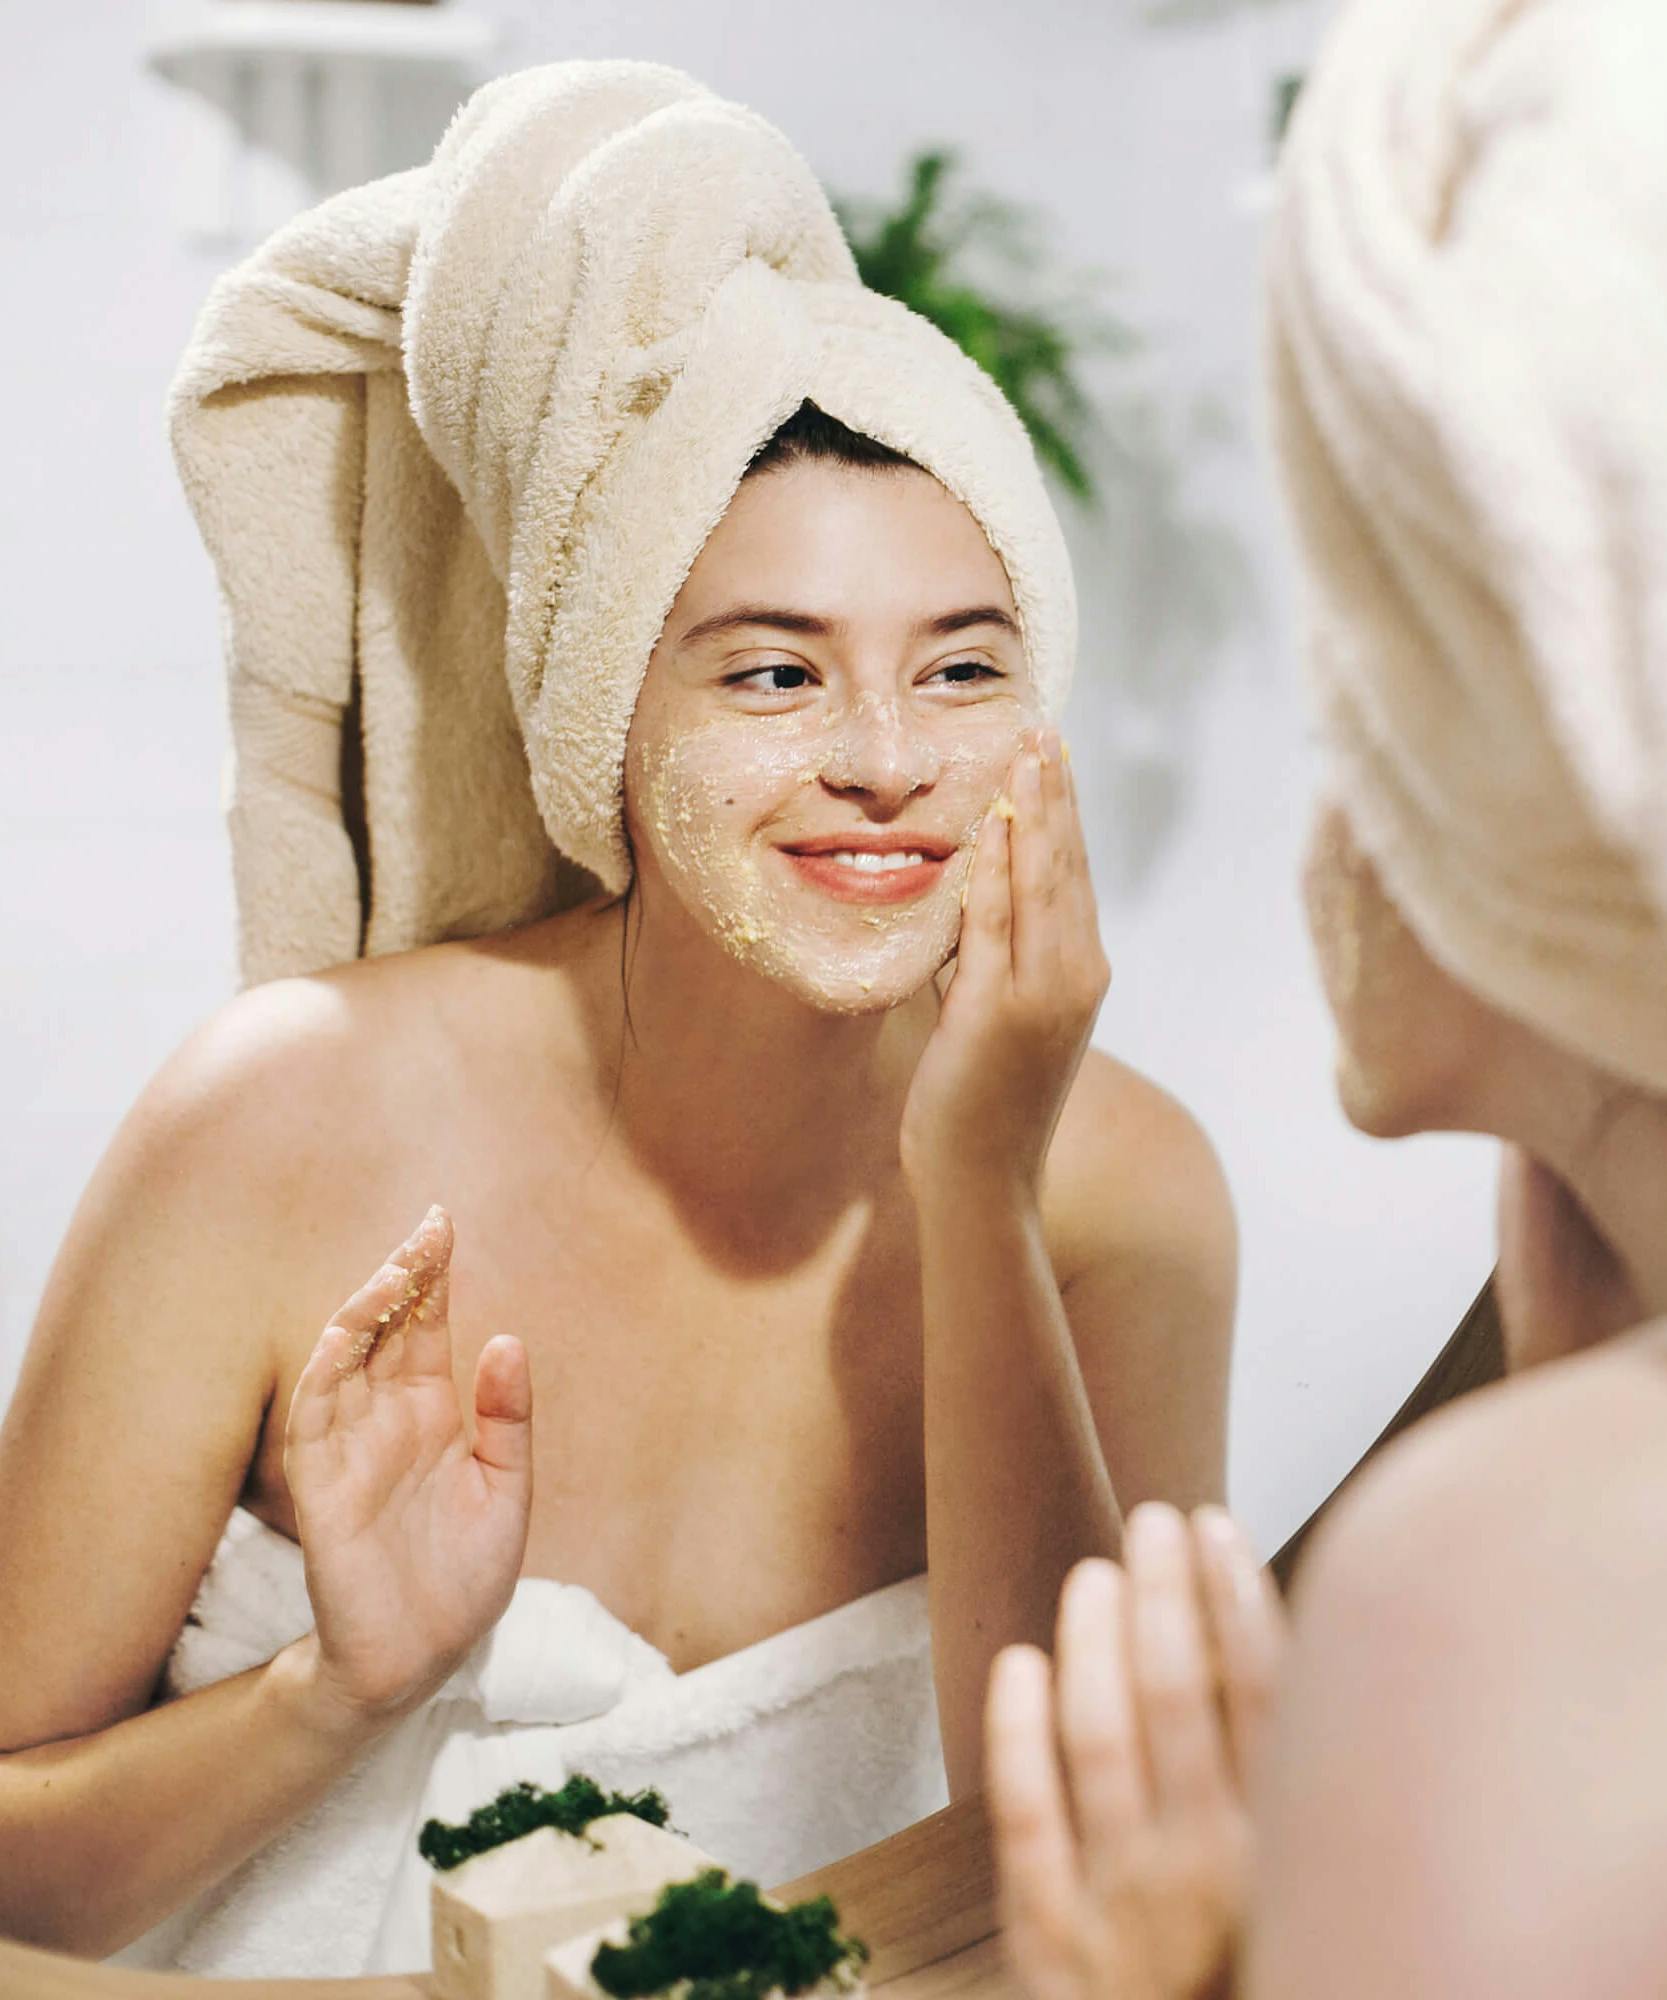 The Best Type Of Exfoliation To Use For Your Skin Type